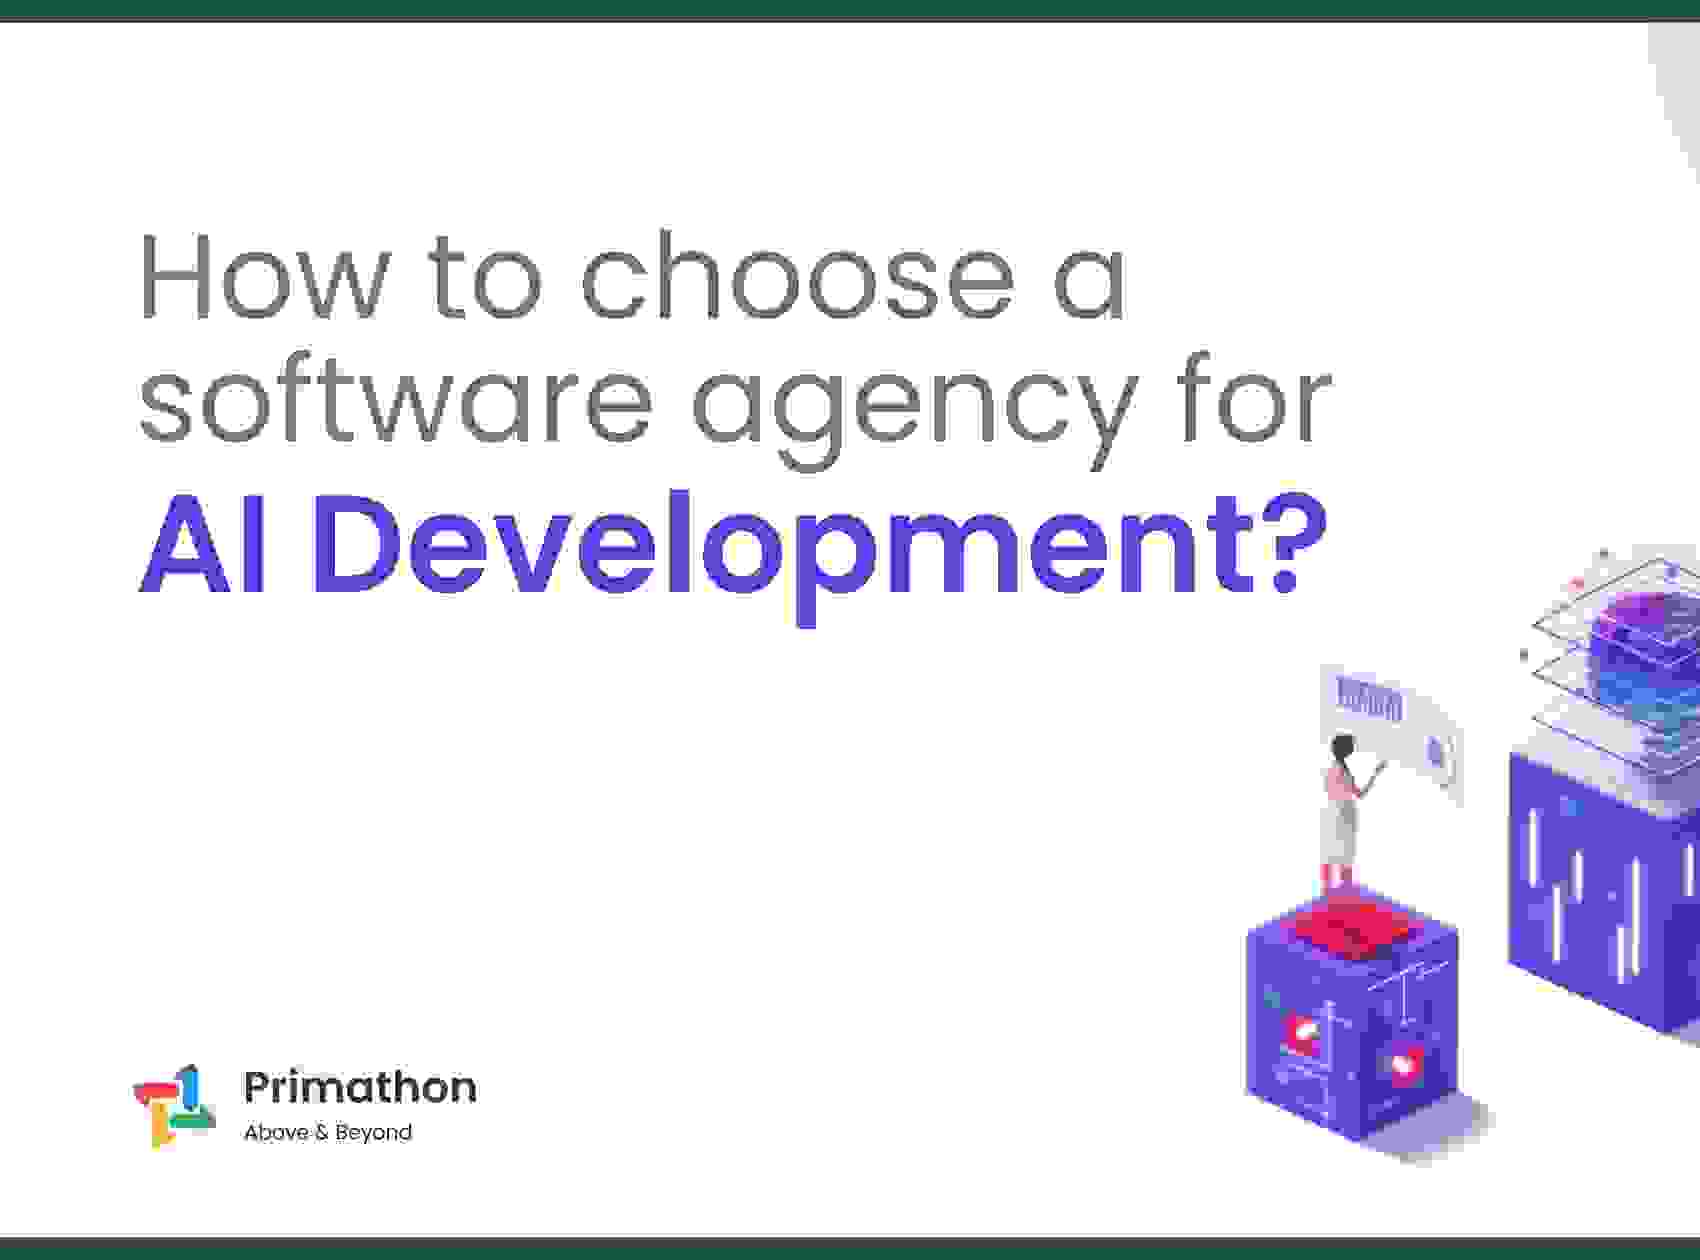 How to choose a software agency for AI development?